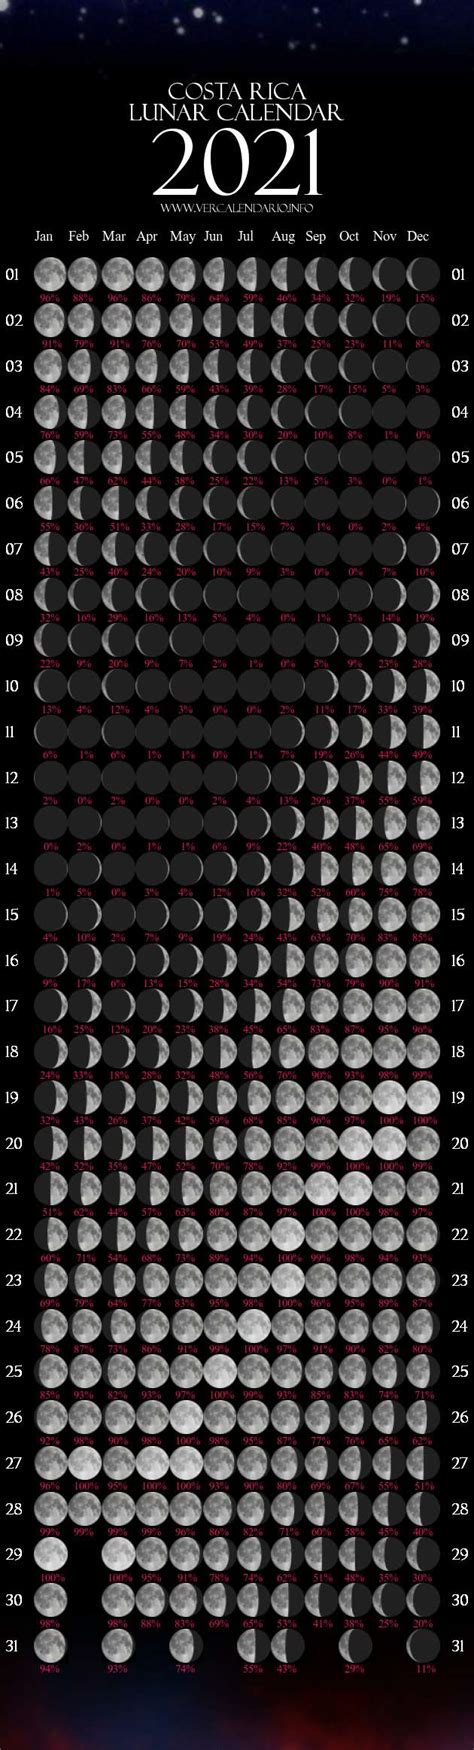 8 phases at a glance (new, waxing crescent, first quarter, waxing gibbous, full, waning. Lunar Calendar 2021 (Costa Rica)